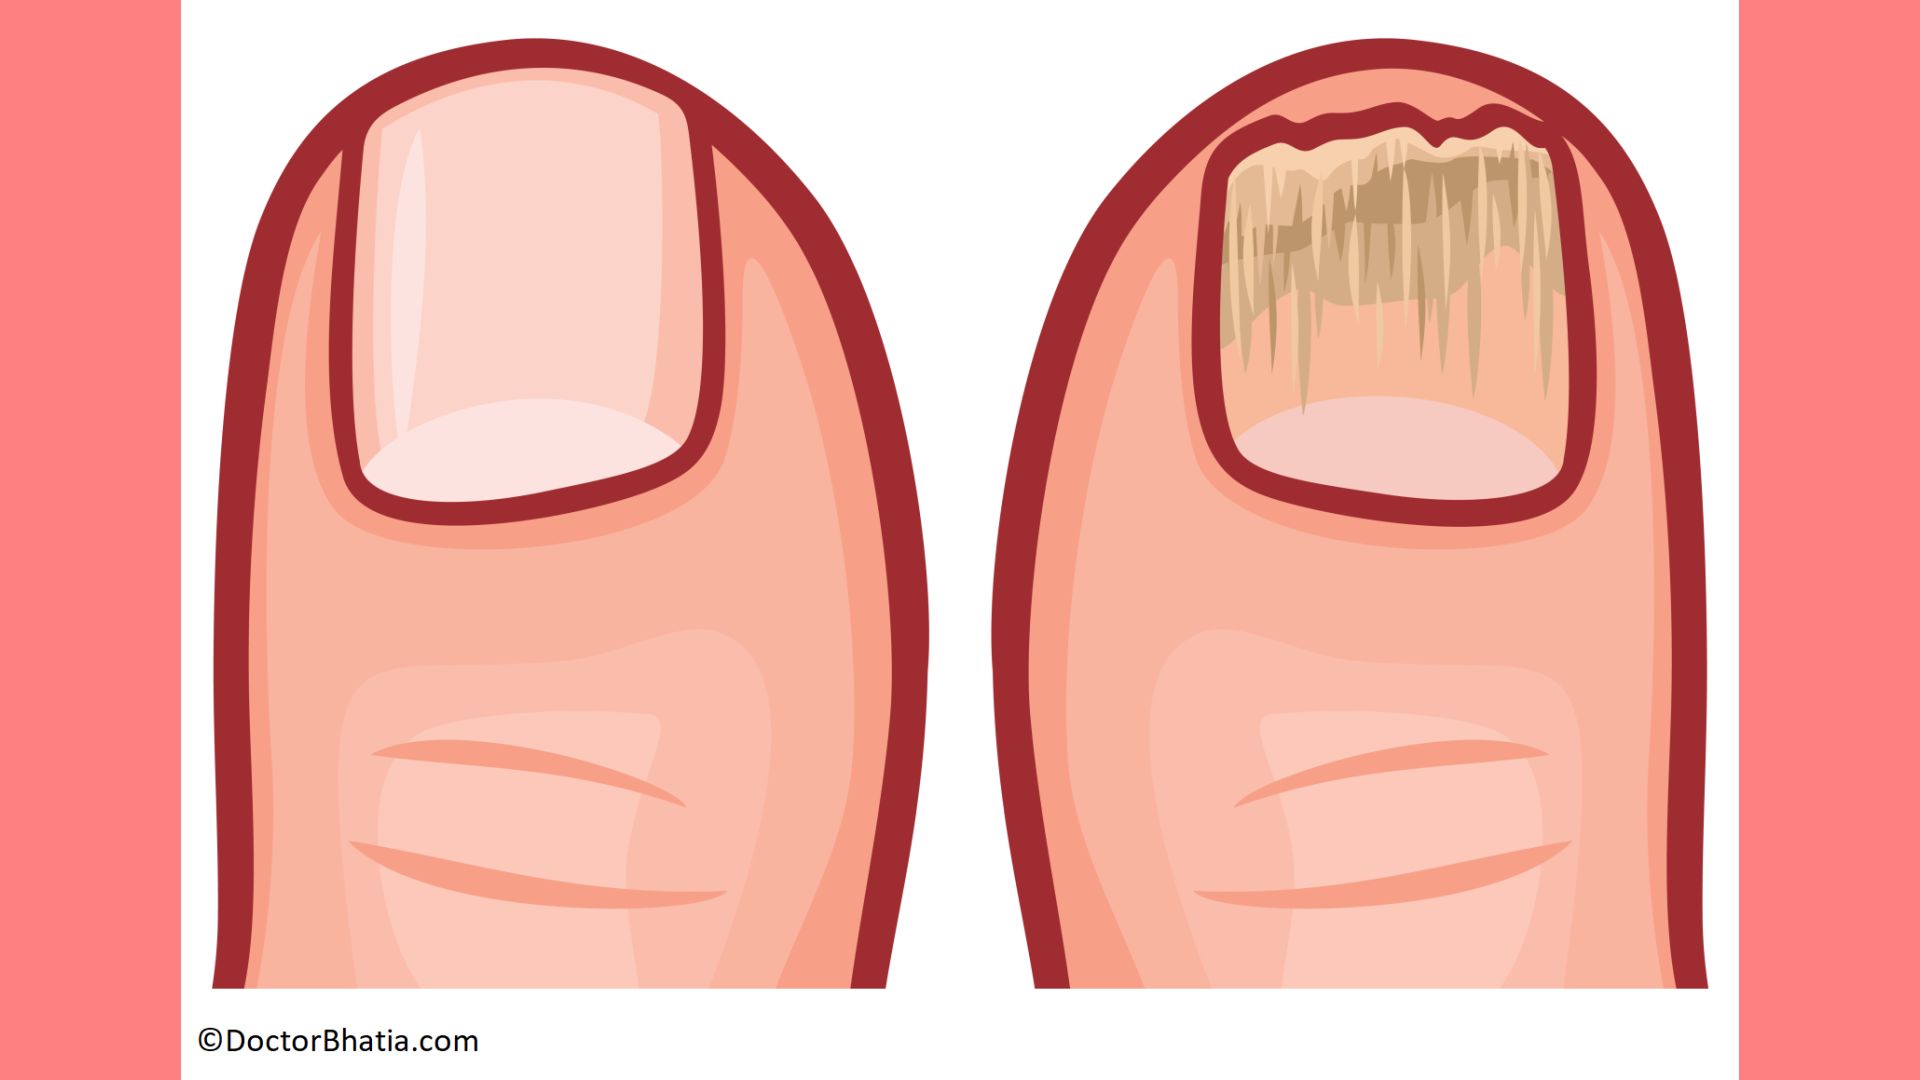 How to get rid of toenail fungus: Home remedies